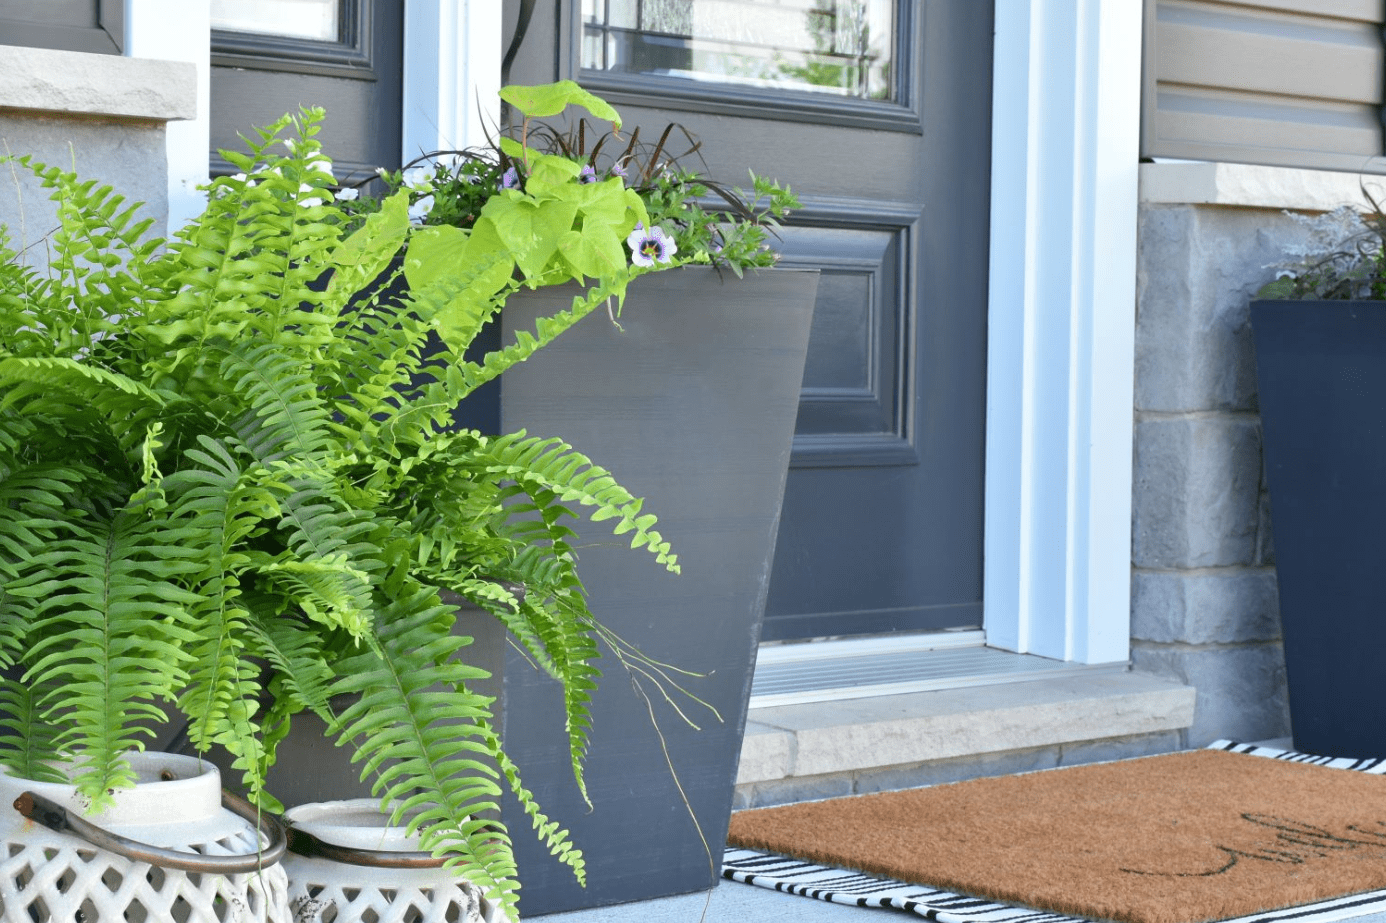 5 Simple Decorating Ideas for Small Porches